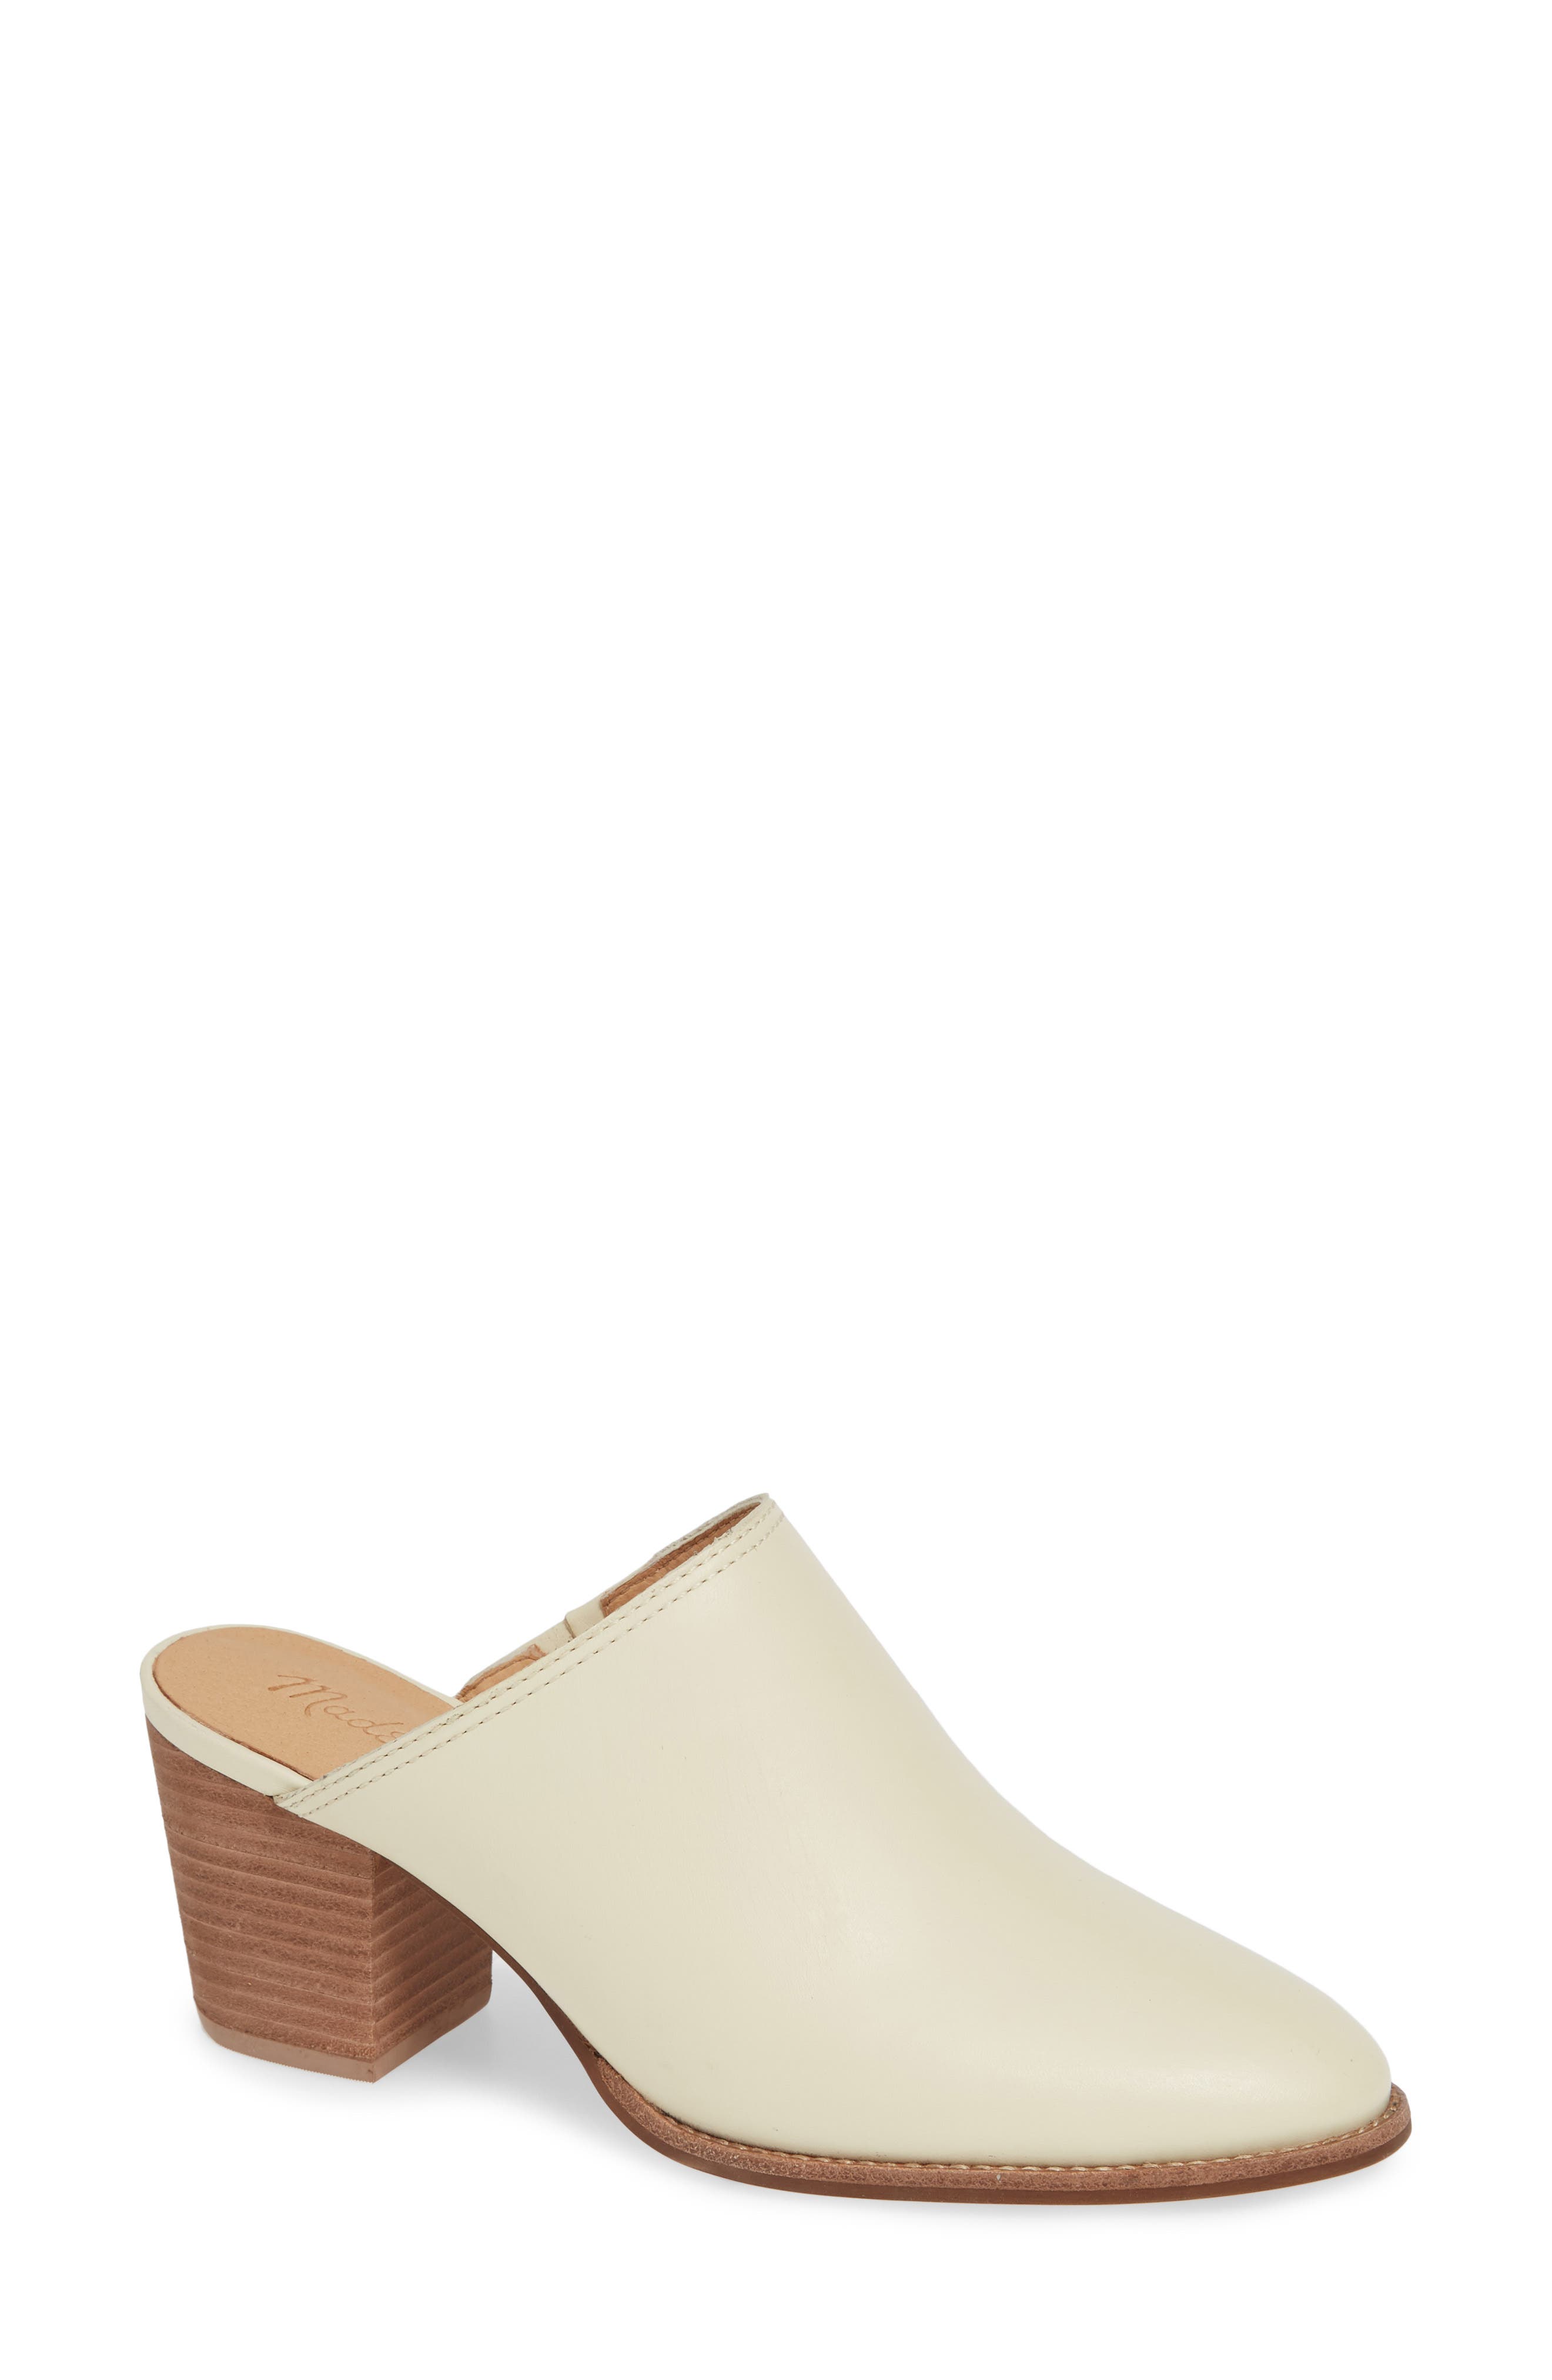 Madewell | The Harper Leather Mule 